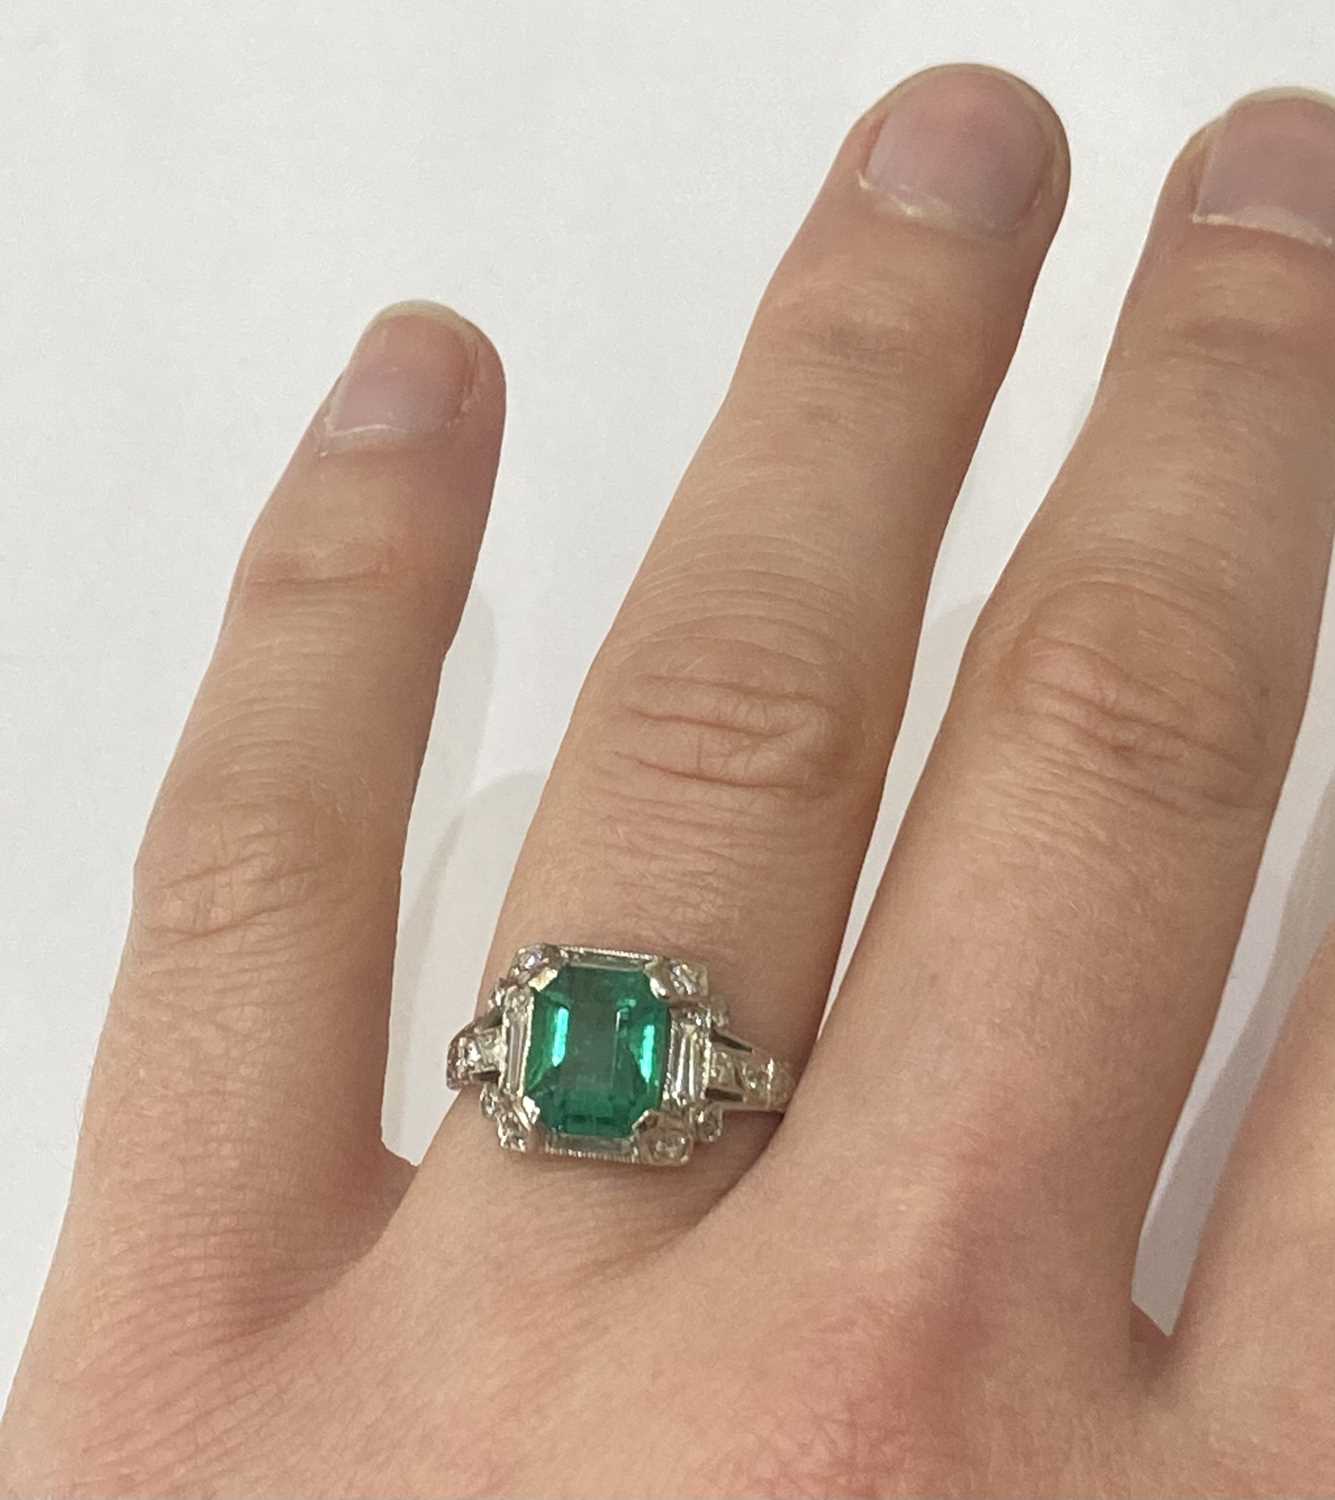 An Emerald and Diamond Ring - Image 6 of 6